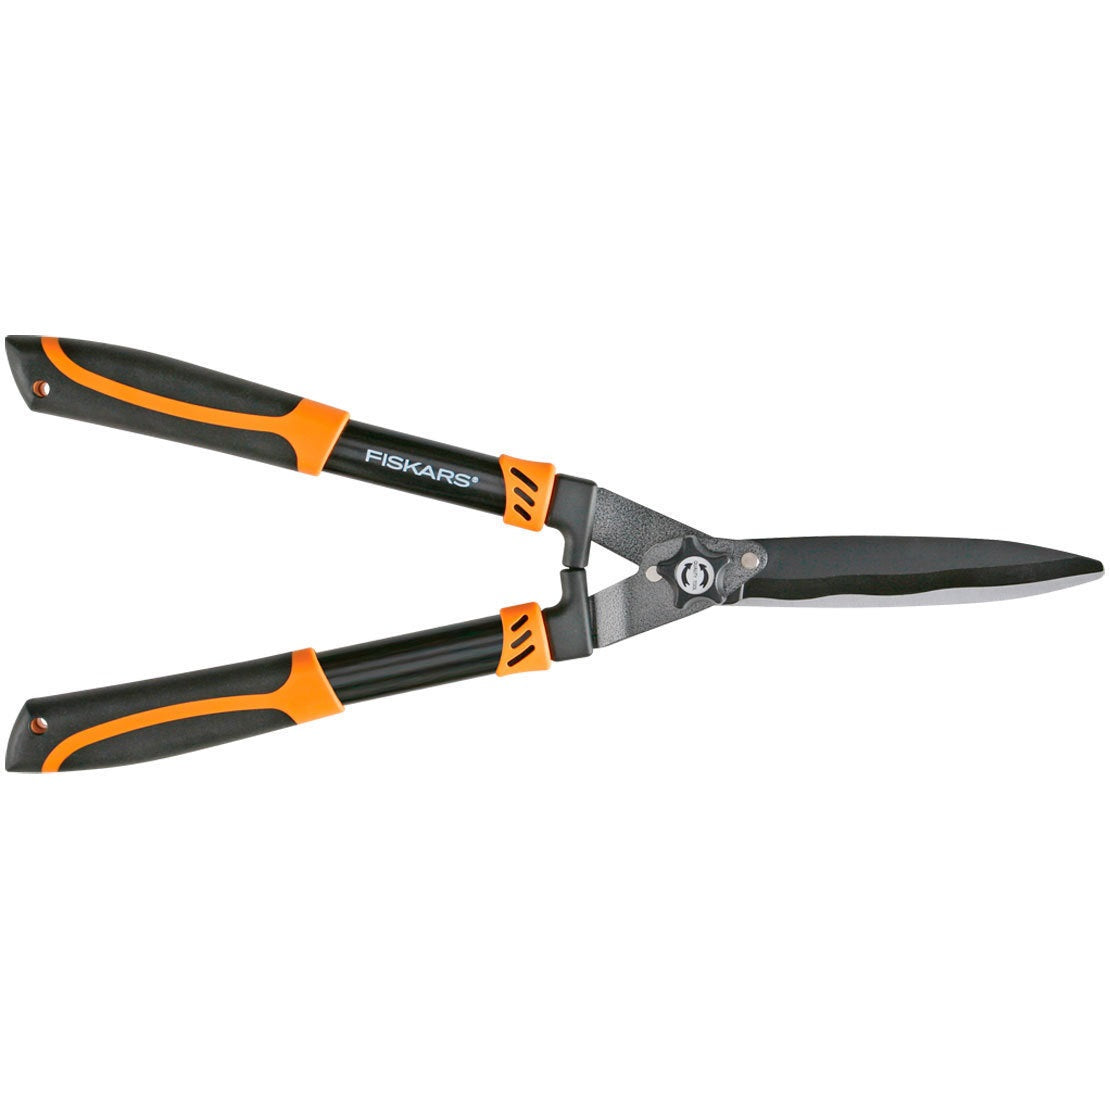 buy shears at cheap rate in bulk. wholesale & retail lawn & gardening tools & supply store.